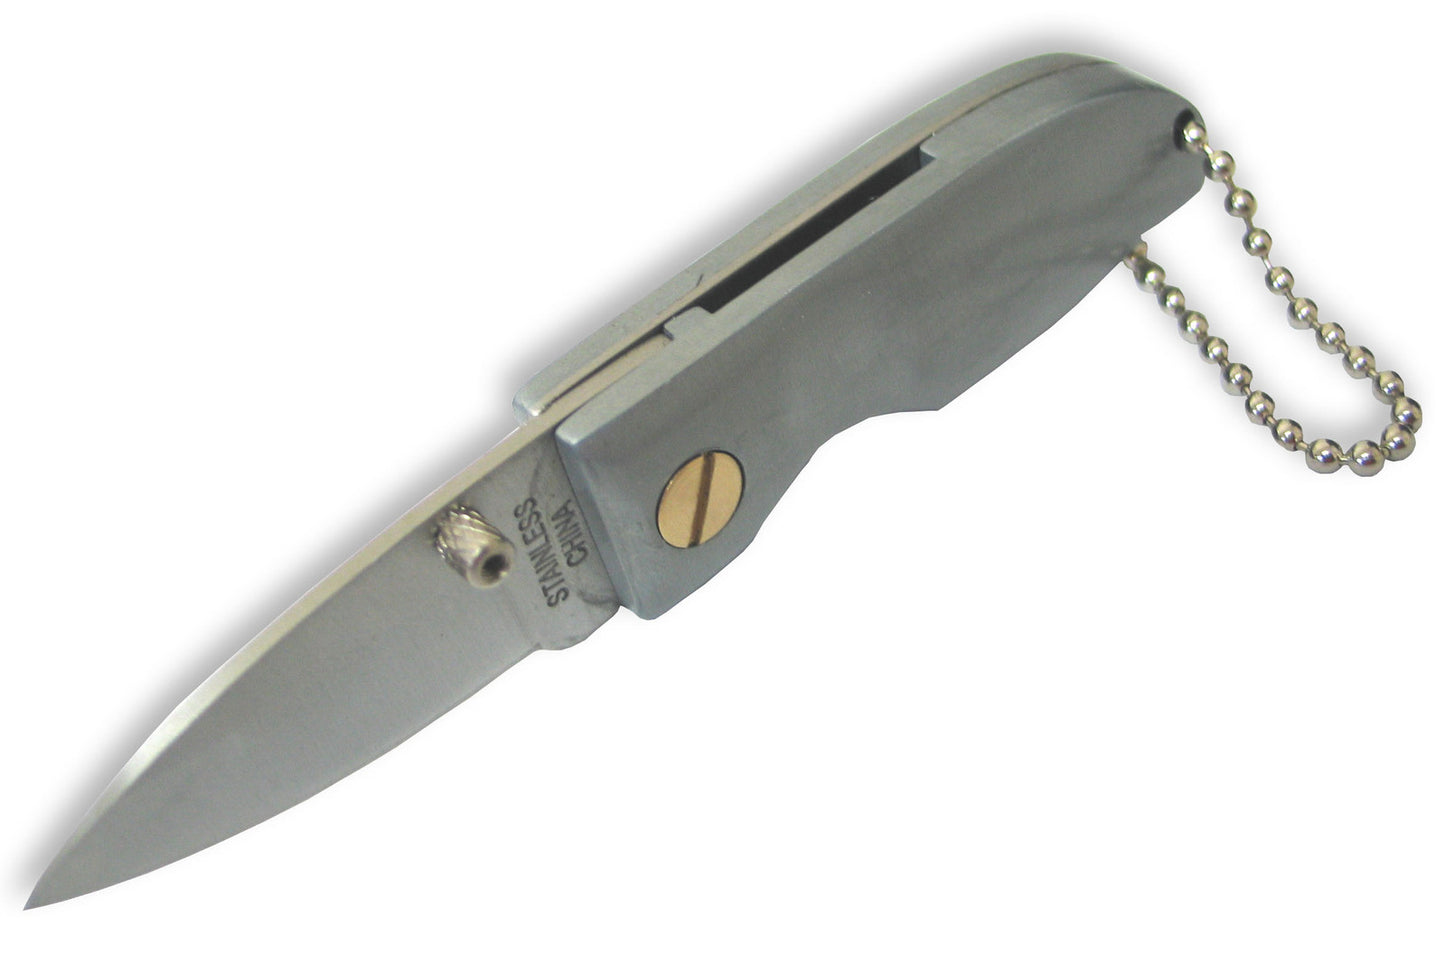 Xhunter Cobra Mouse Compact Pocket Folding Knife 40-100 - Silver 4.3 Inch Overall #kf0126 Silver Dim Gray